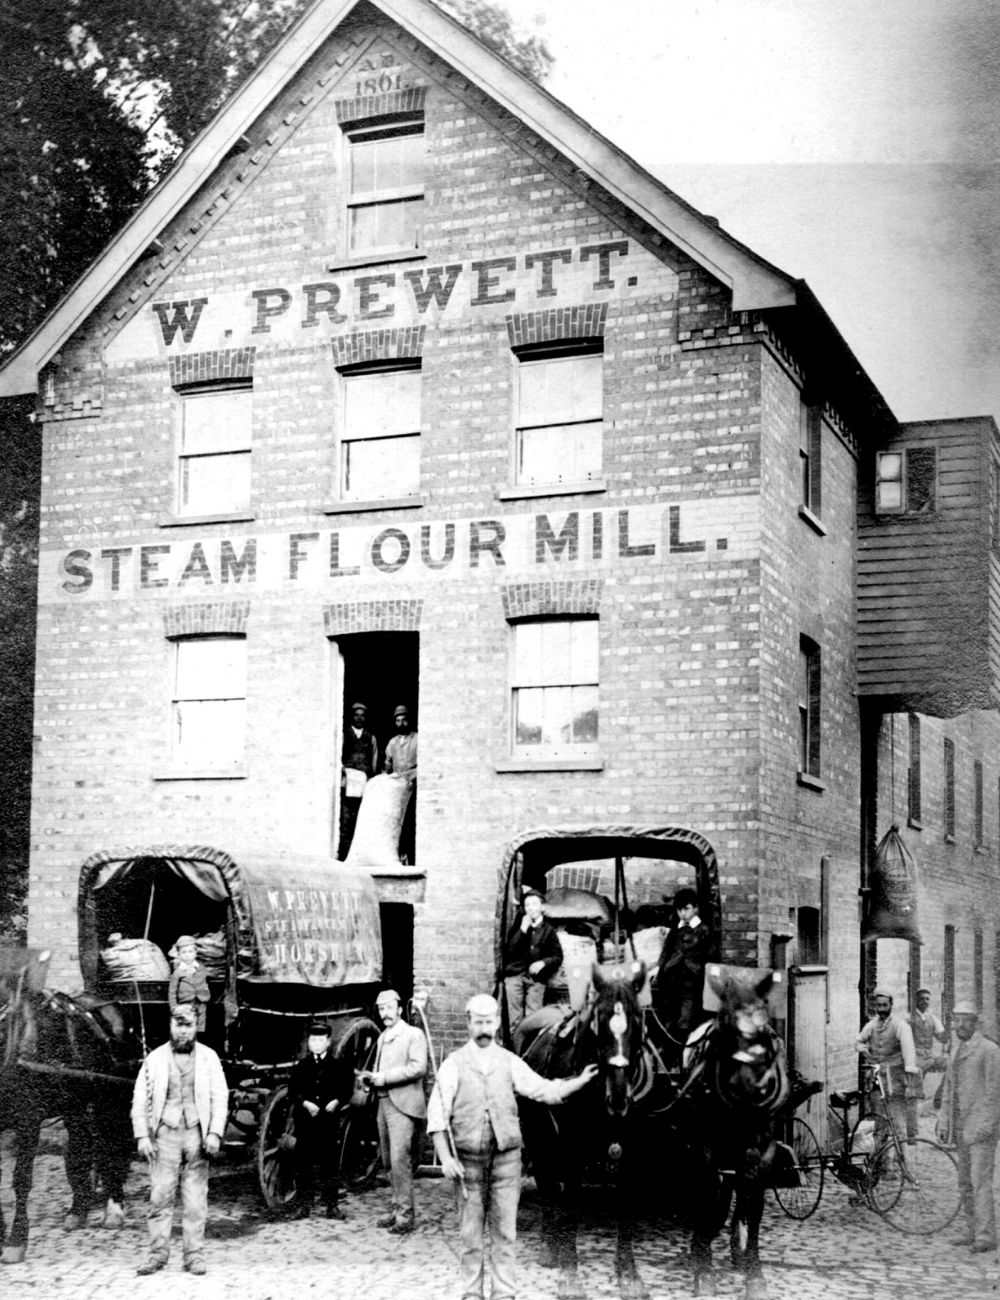 Four-storey brick-built steam flour mill. There are two horse-drawn wagons at the front, and a number of men and boys (presumably workers)